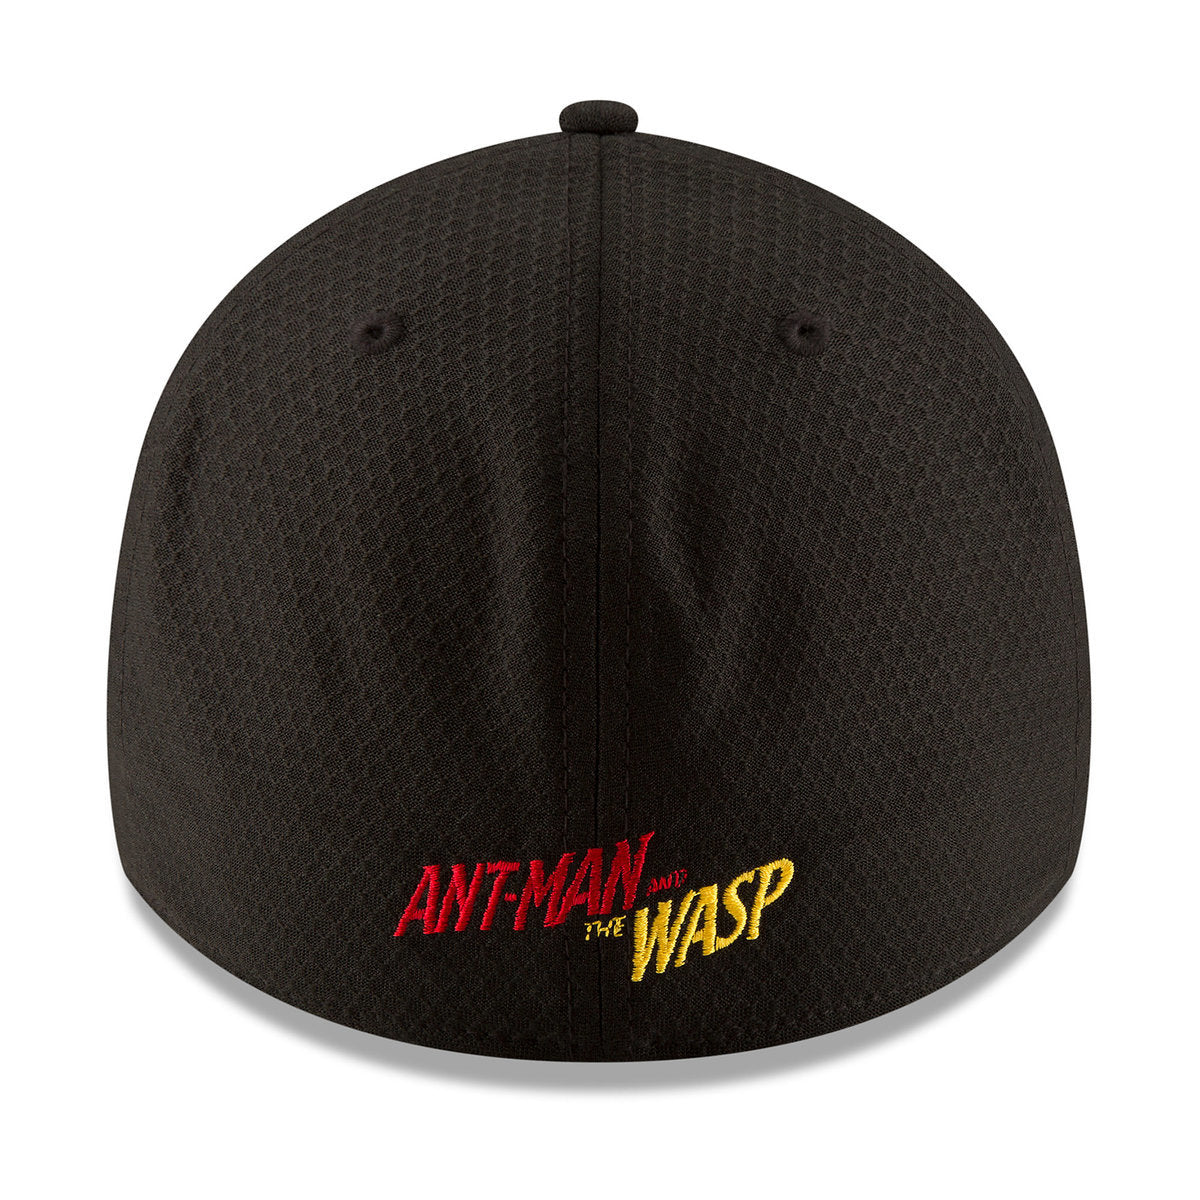 Disney Ant-Man and The Wasp Cap for Adults by New Era Limited Edition New w Box